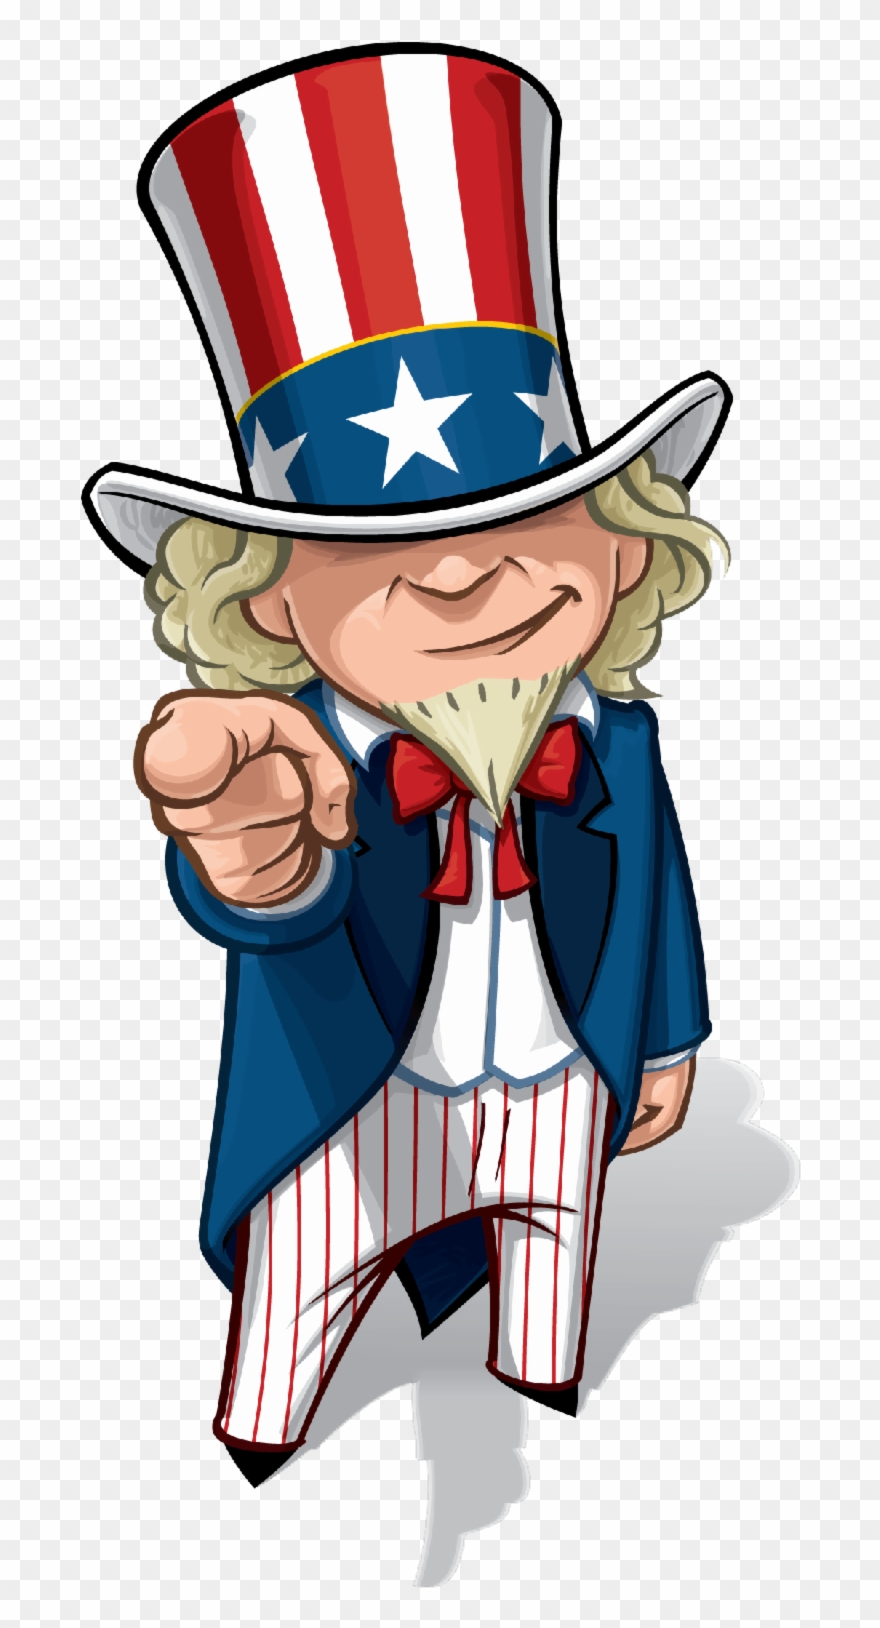 Uncle Sam Cartoon Drawing Clipart